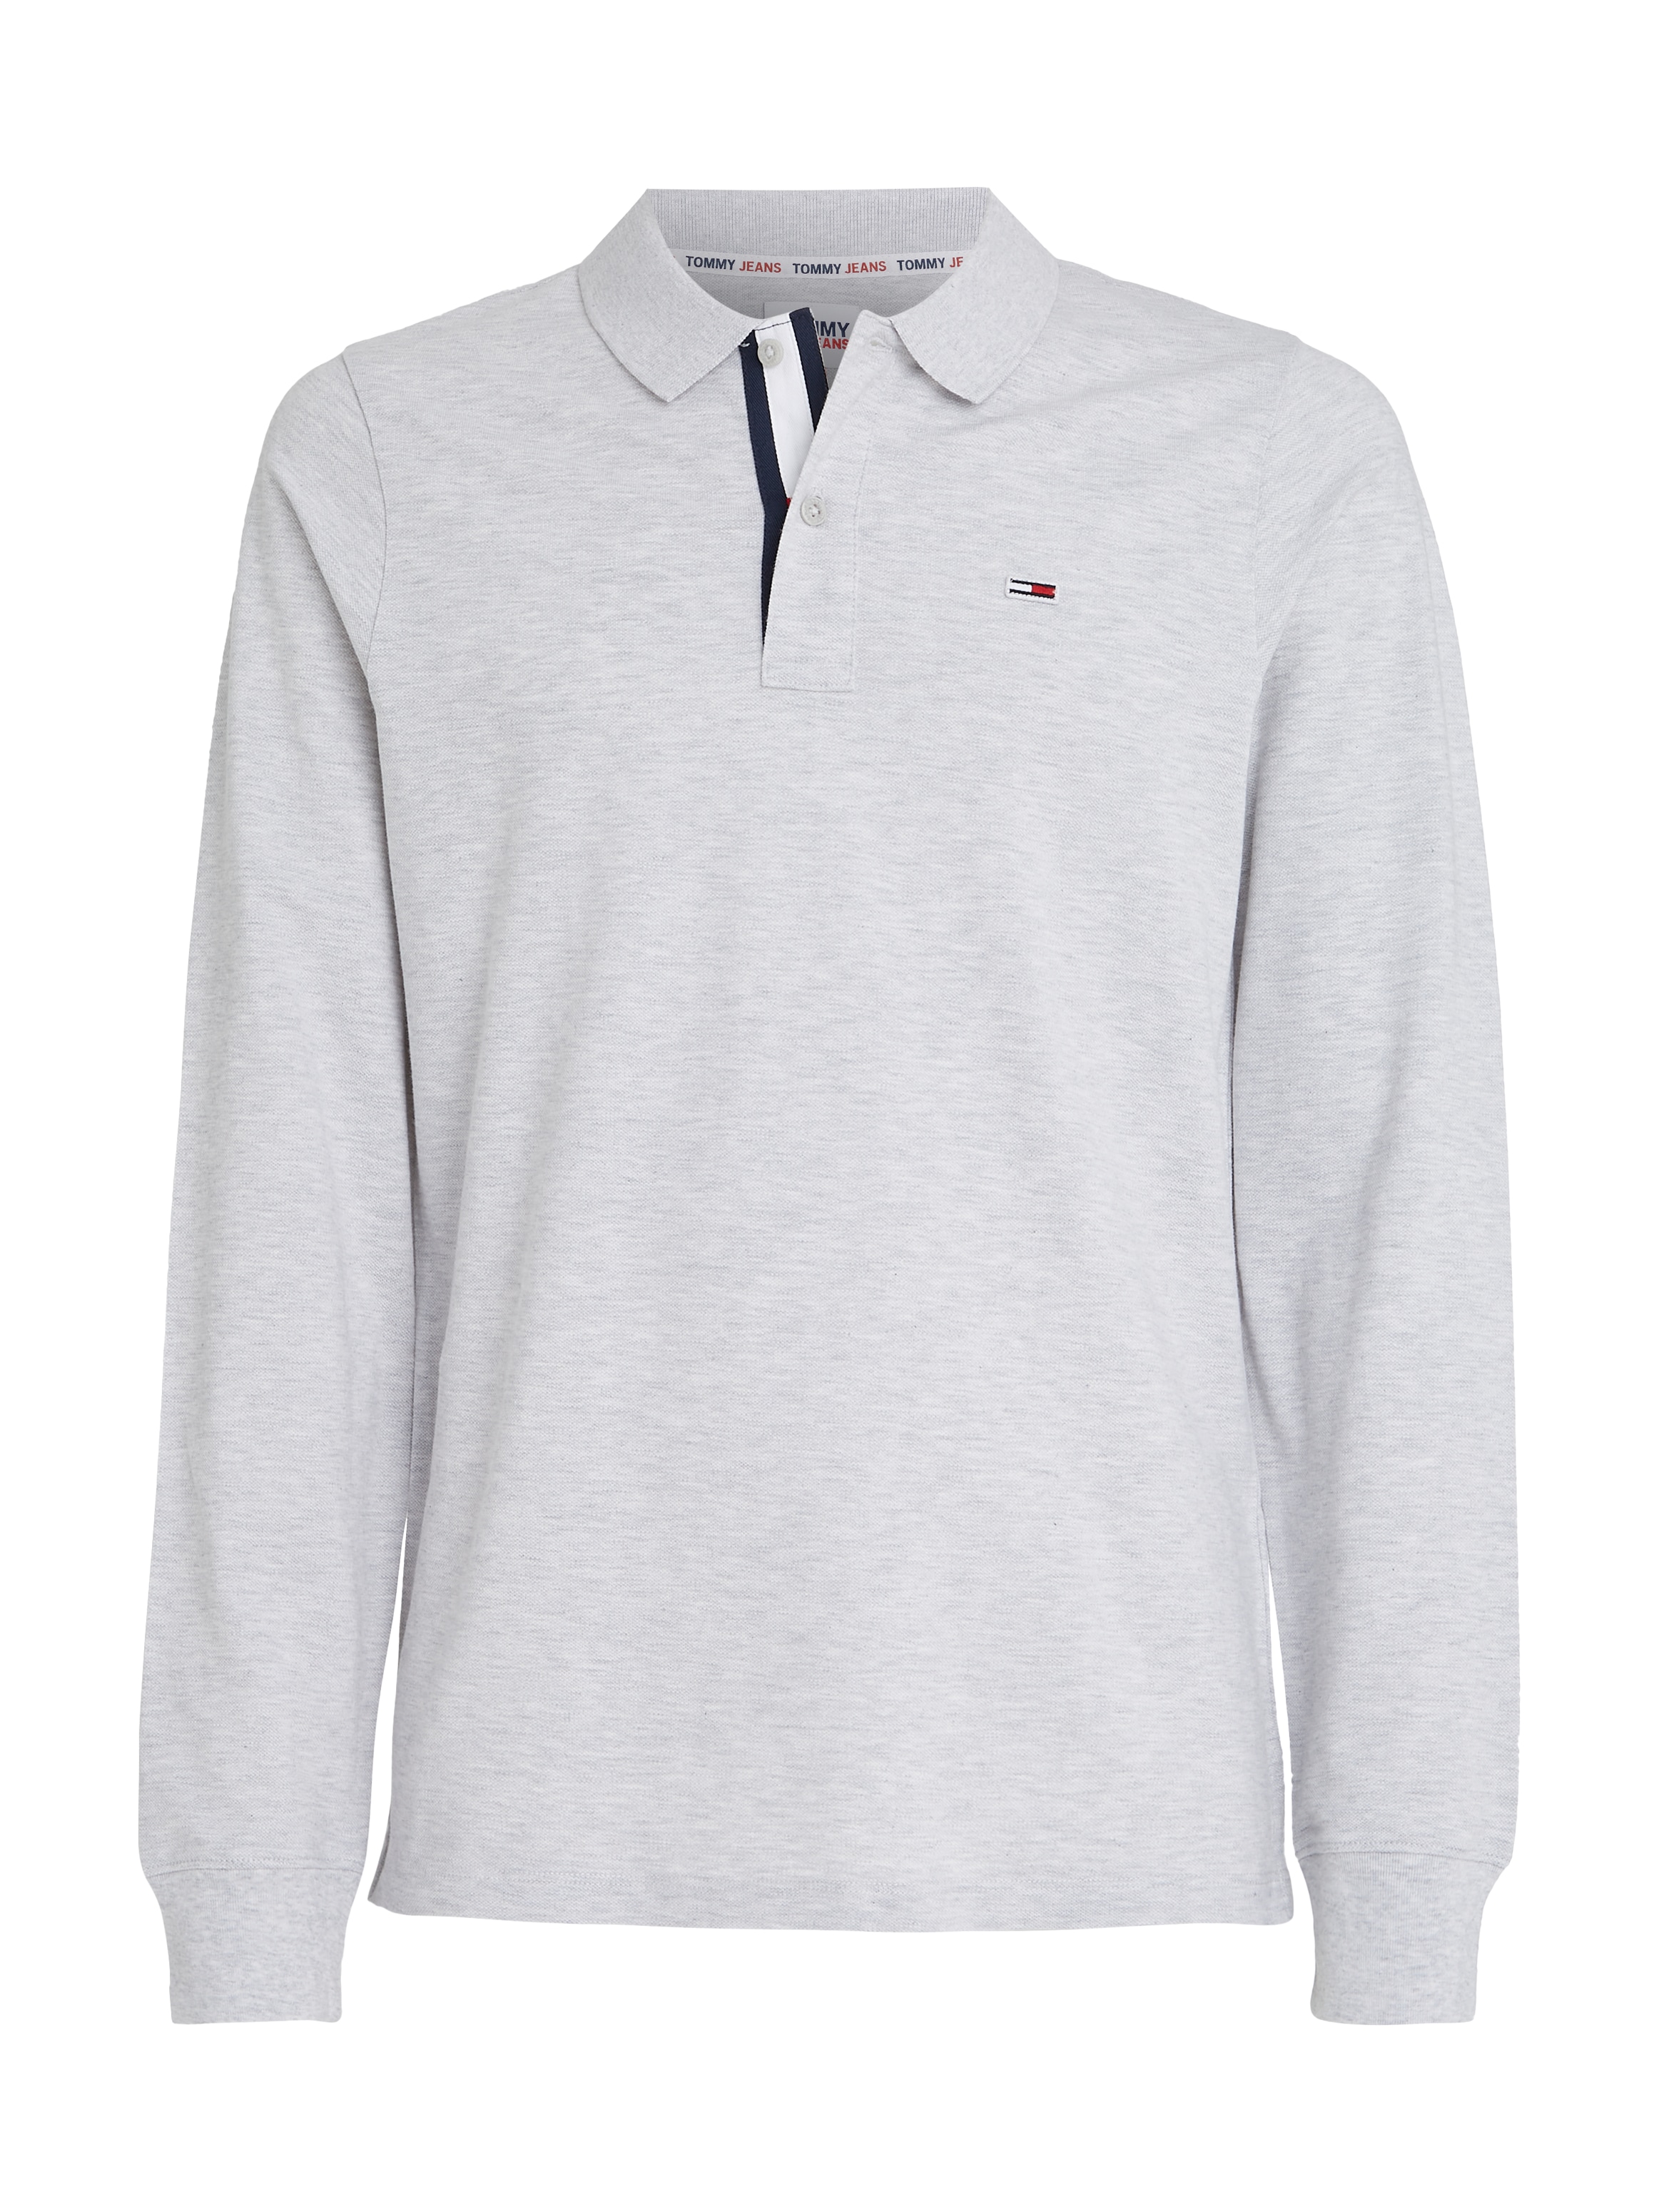 POLO« LS online »TJM Tommy Jeans SLIM bei SOLID Langarm-Poloshirt